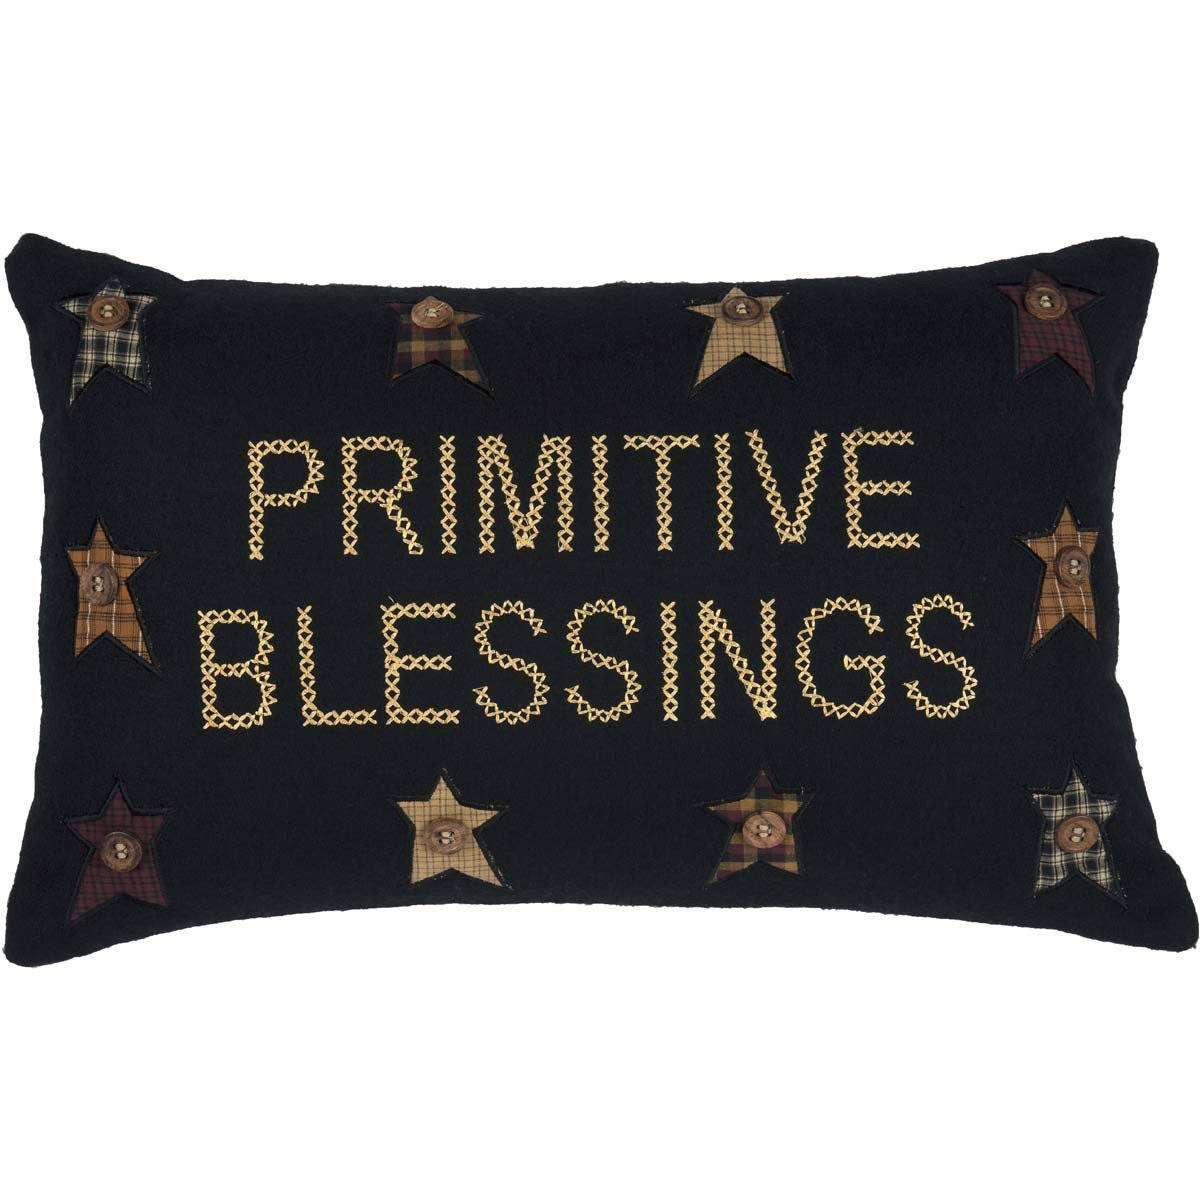 https://www.thefoxdecor.com/cdn/shop/products/heritage-farms-primitive-blessings-pillow-14x22-pillows-vhc-brands-108864.jpg?v=1600575751